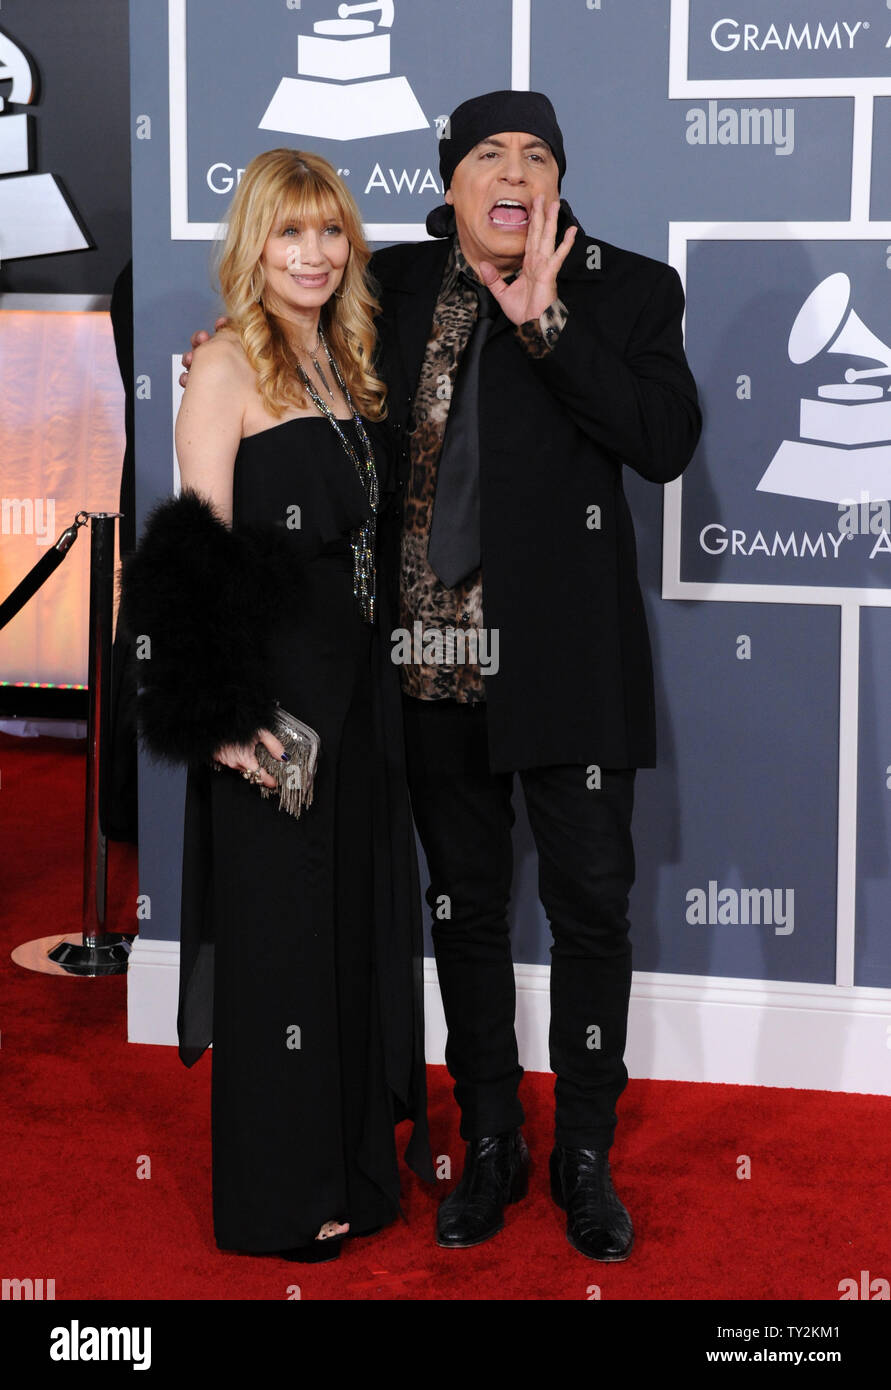 Musician Steven Van Zandt and his wife Maureen Van Zandt arrive at the 54th annual Grammy Awards at Staples Center in Los Angeles on February 12, 2012.   UPI/Jim Ruymen Stock Photo